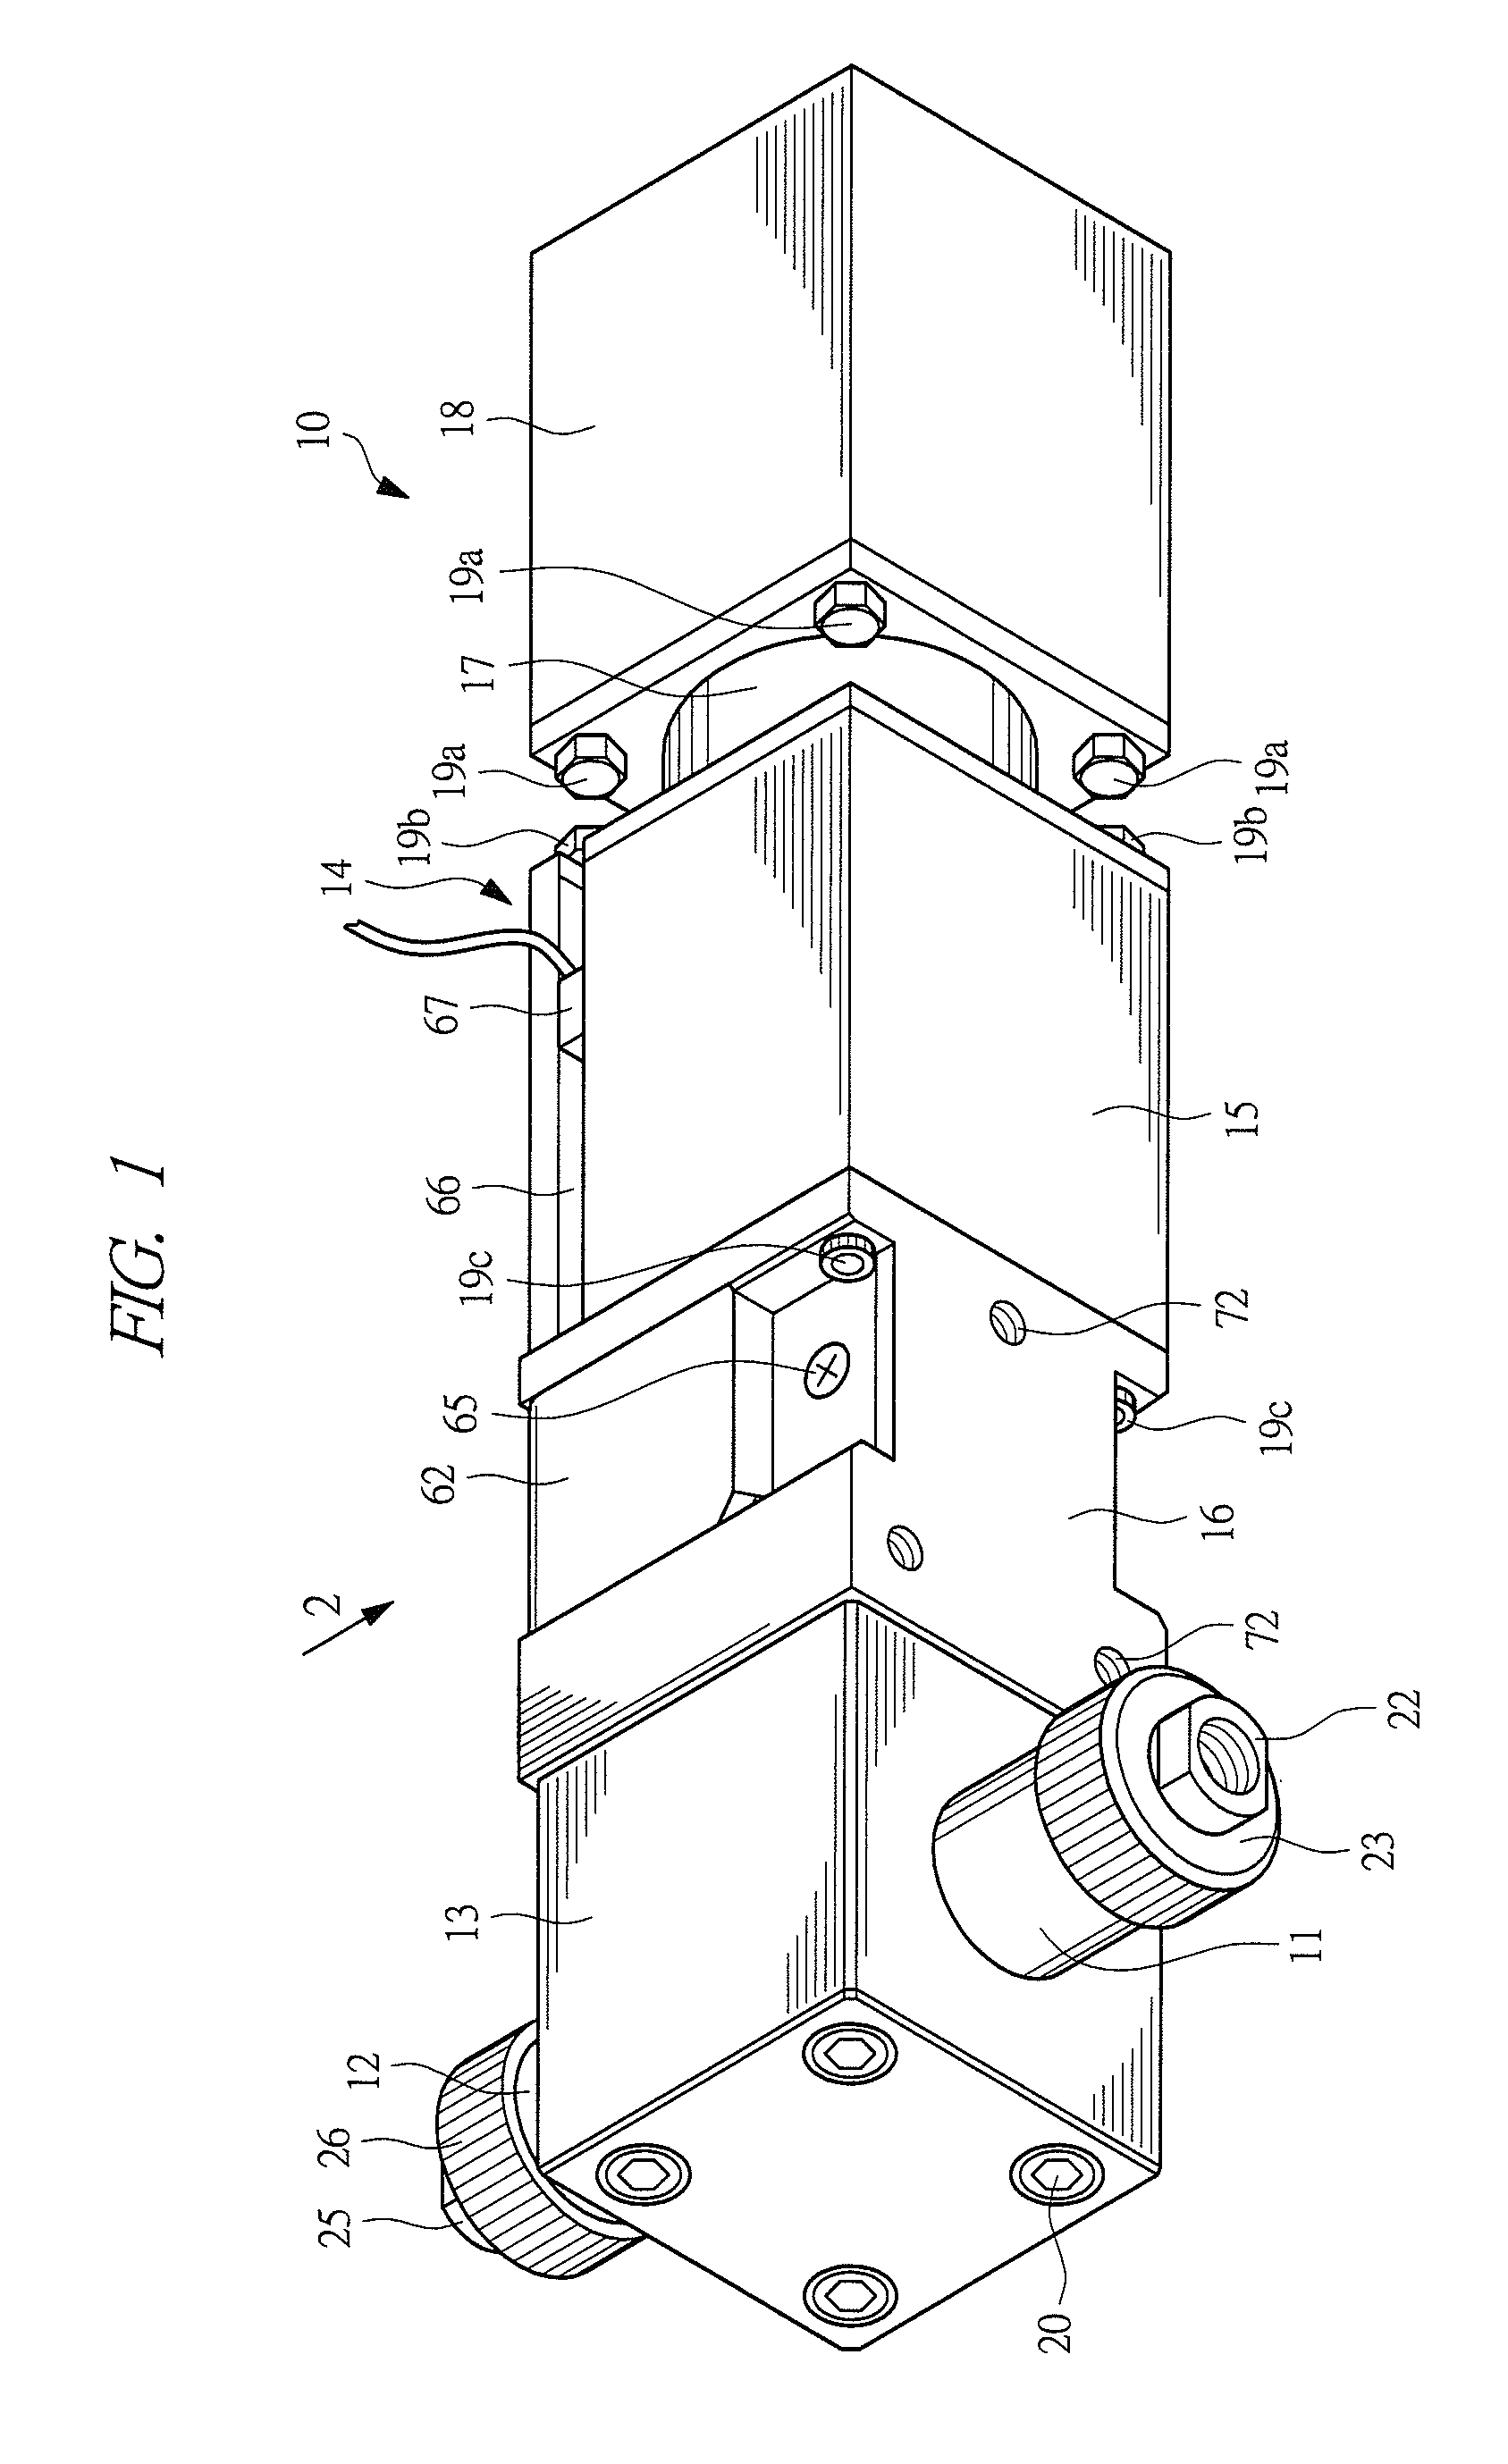 Chemical liquid supplying apparatus and pump assembly